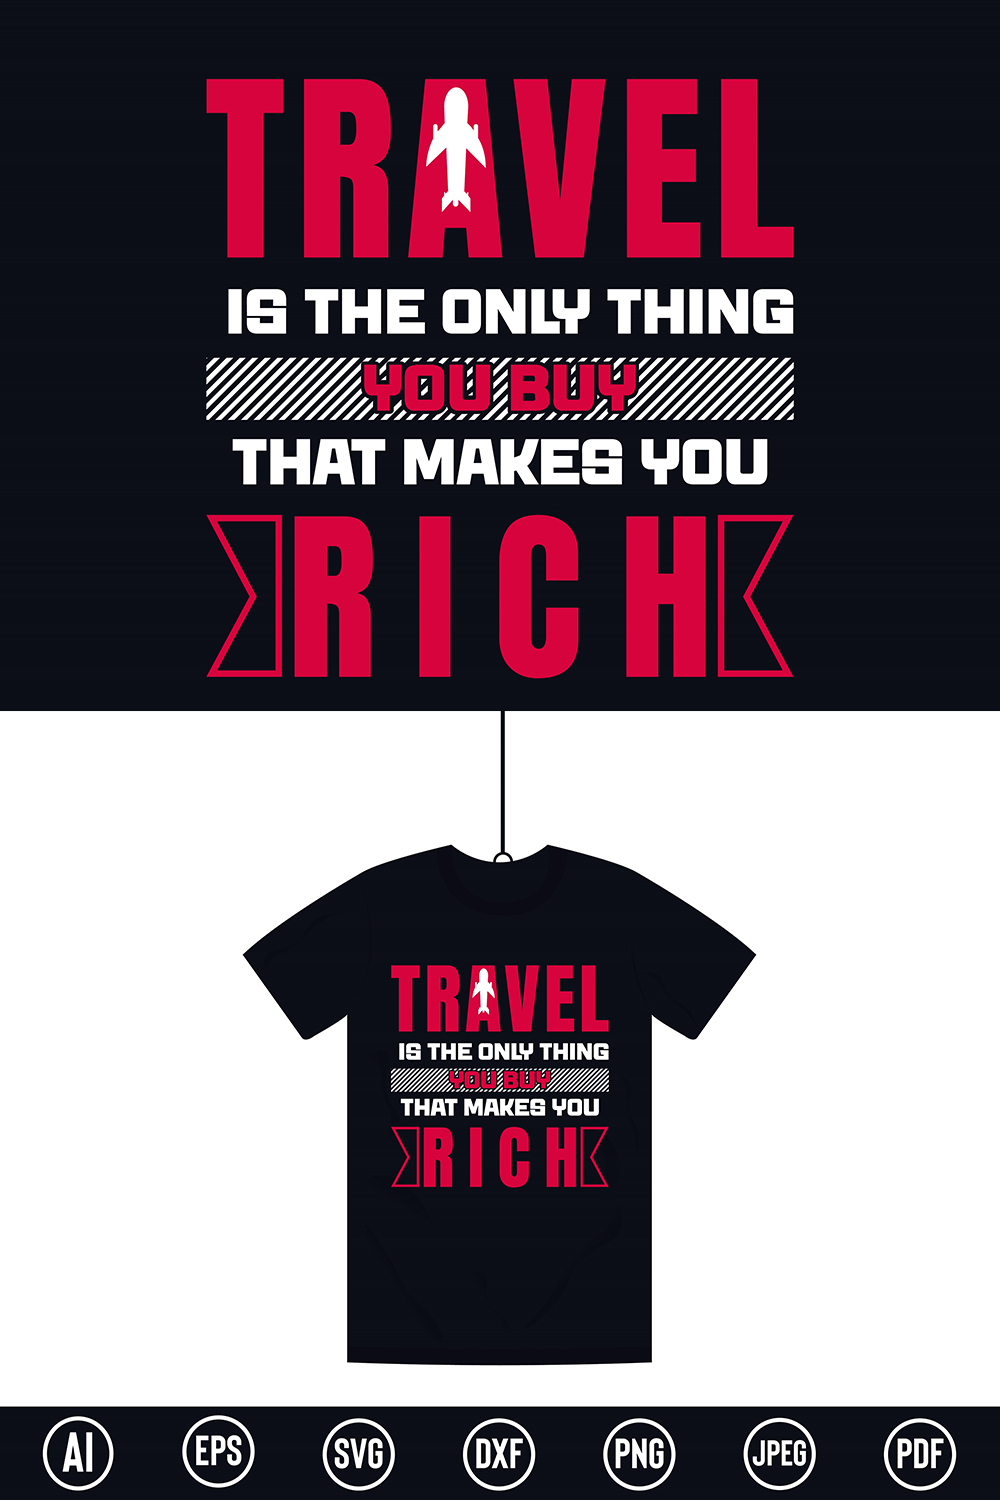 Modern Typography Travel T-Shirt design with “Travel is the only thing your buy that makes you rich” quote for t-shirt, posters, stickers, mug prints, banners, gift cards, labels etc pinterest preview image.